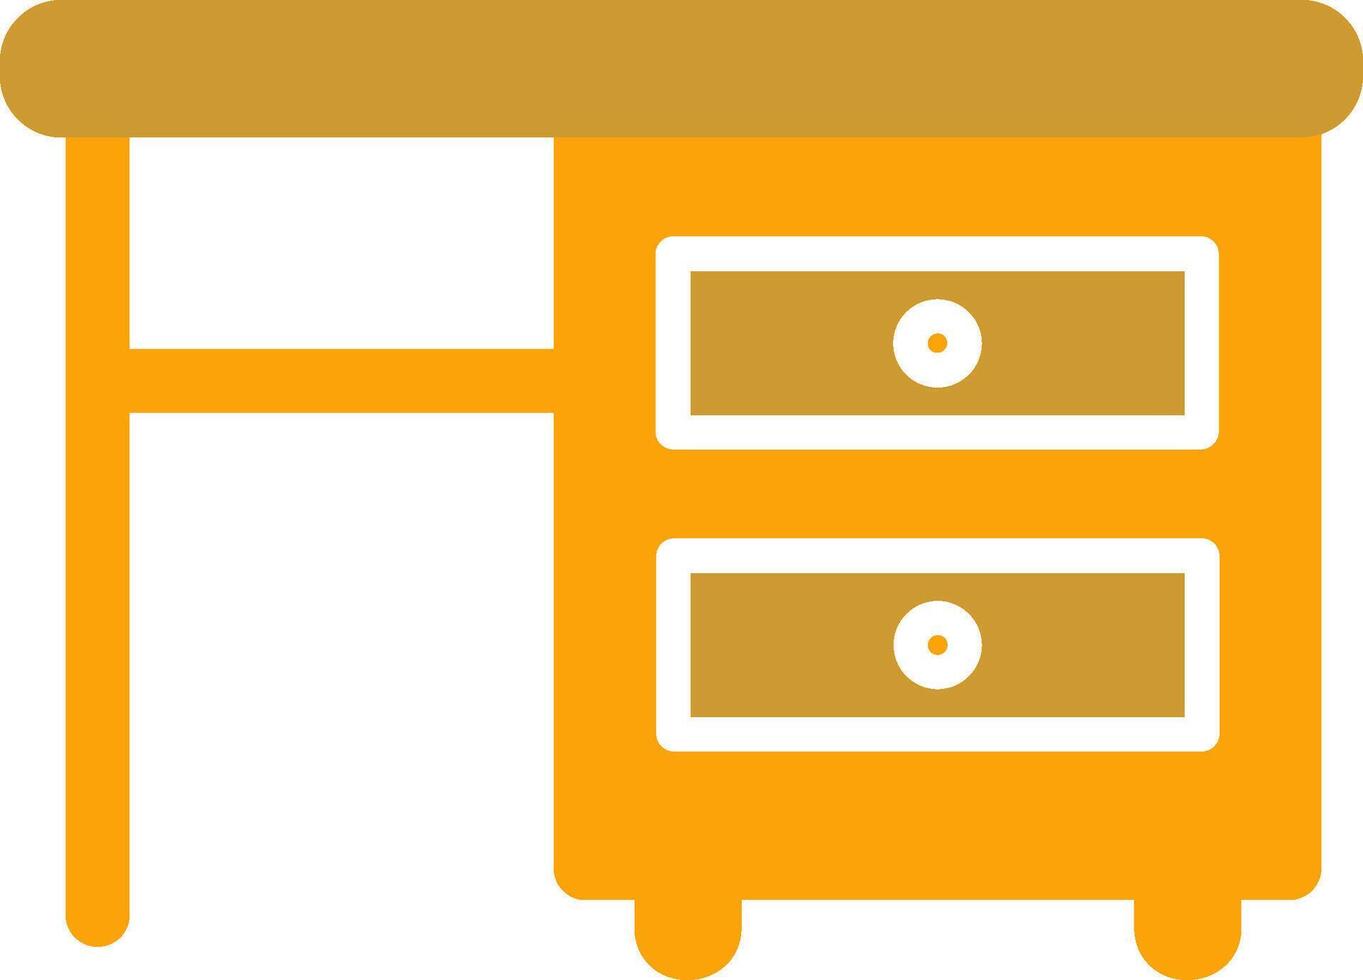 Table with Drawers I Vector Icon